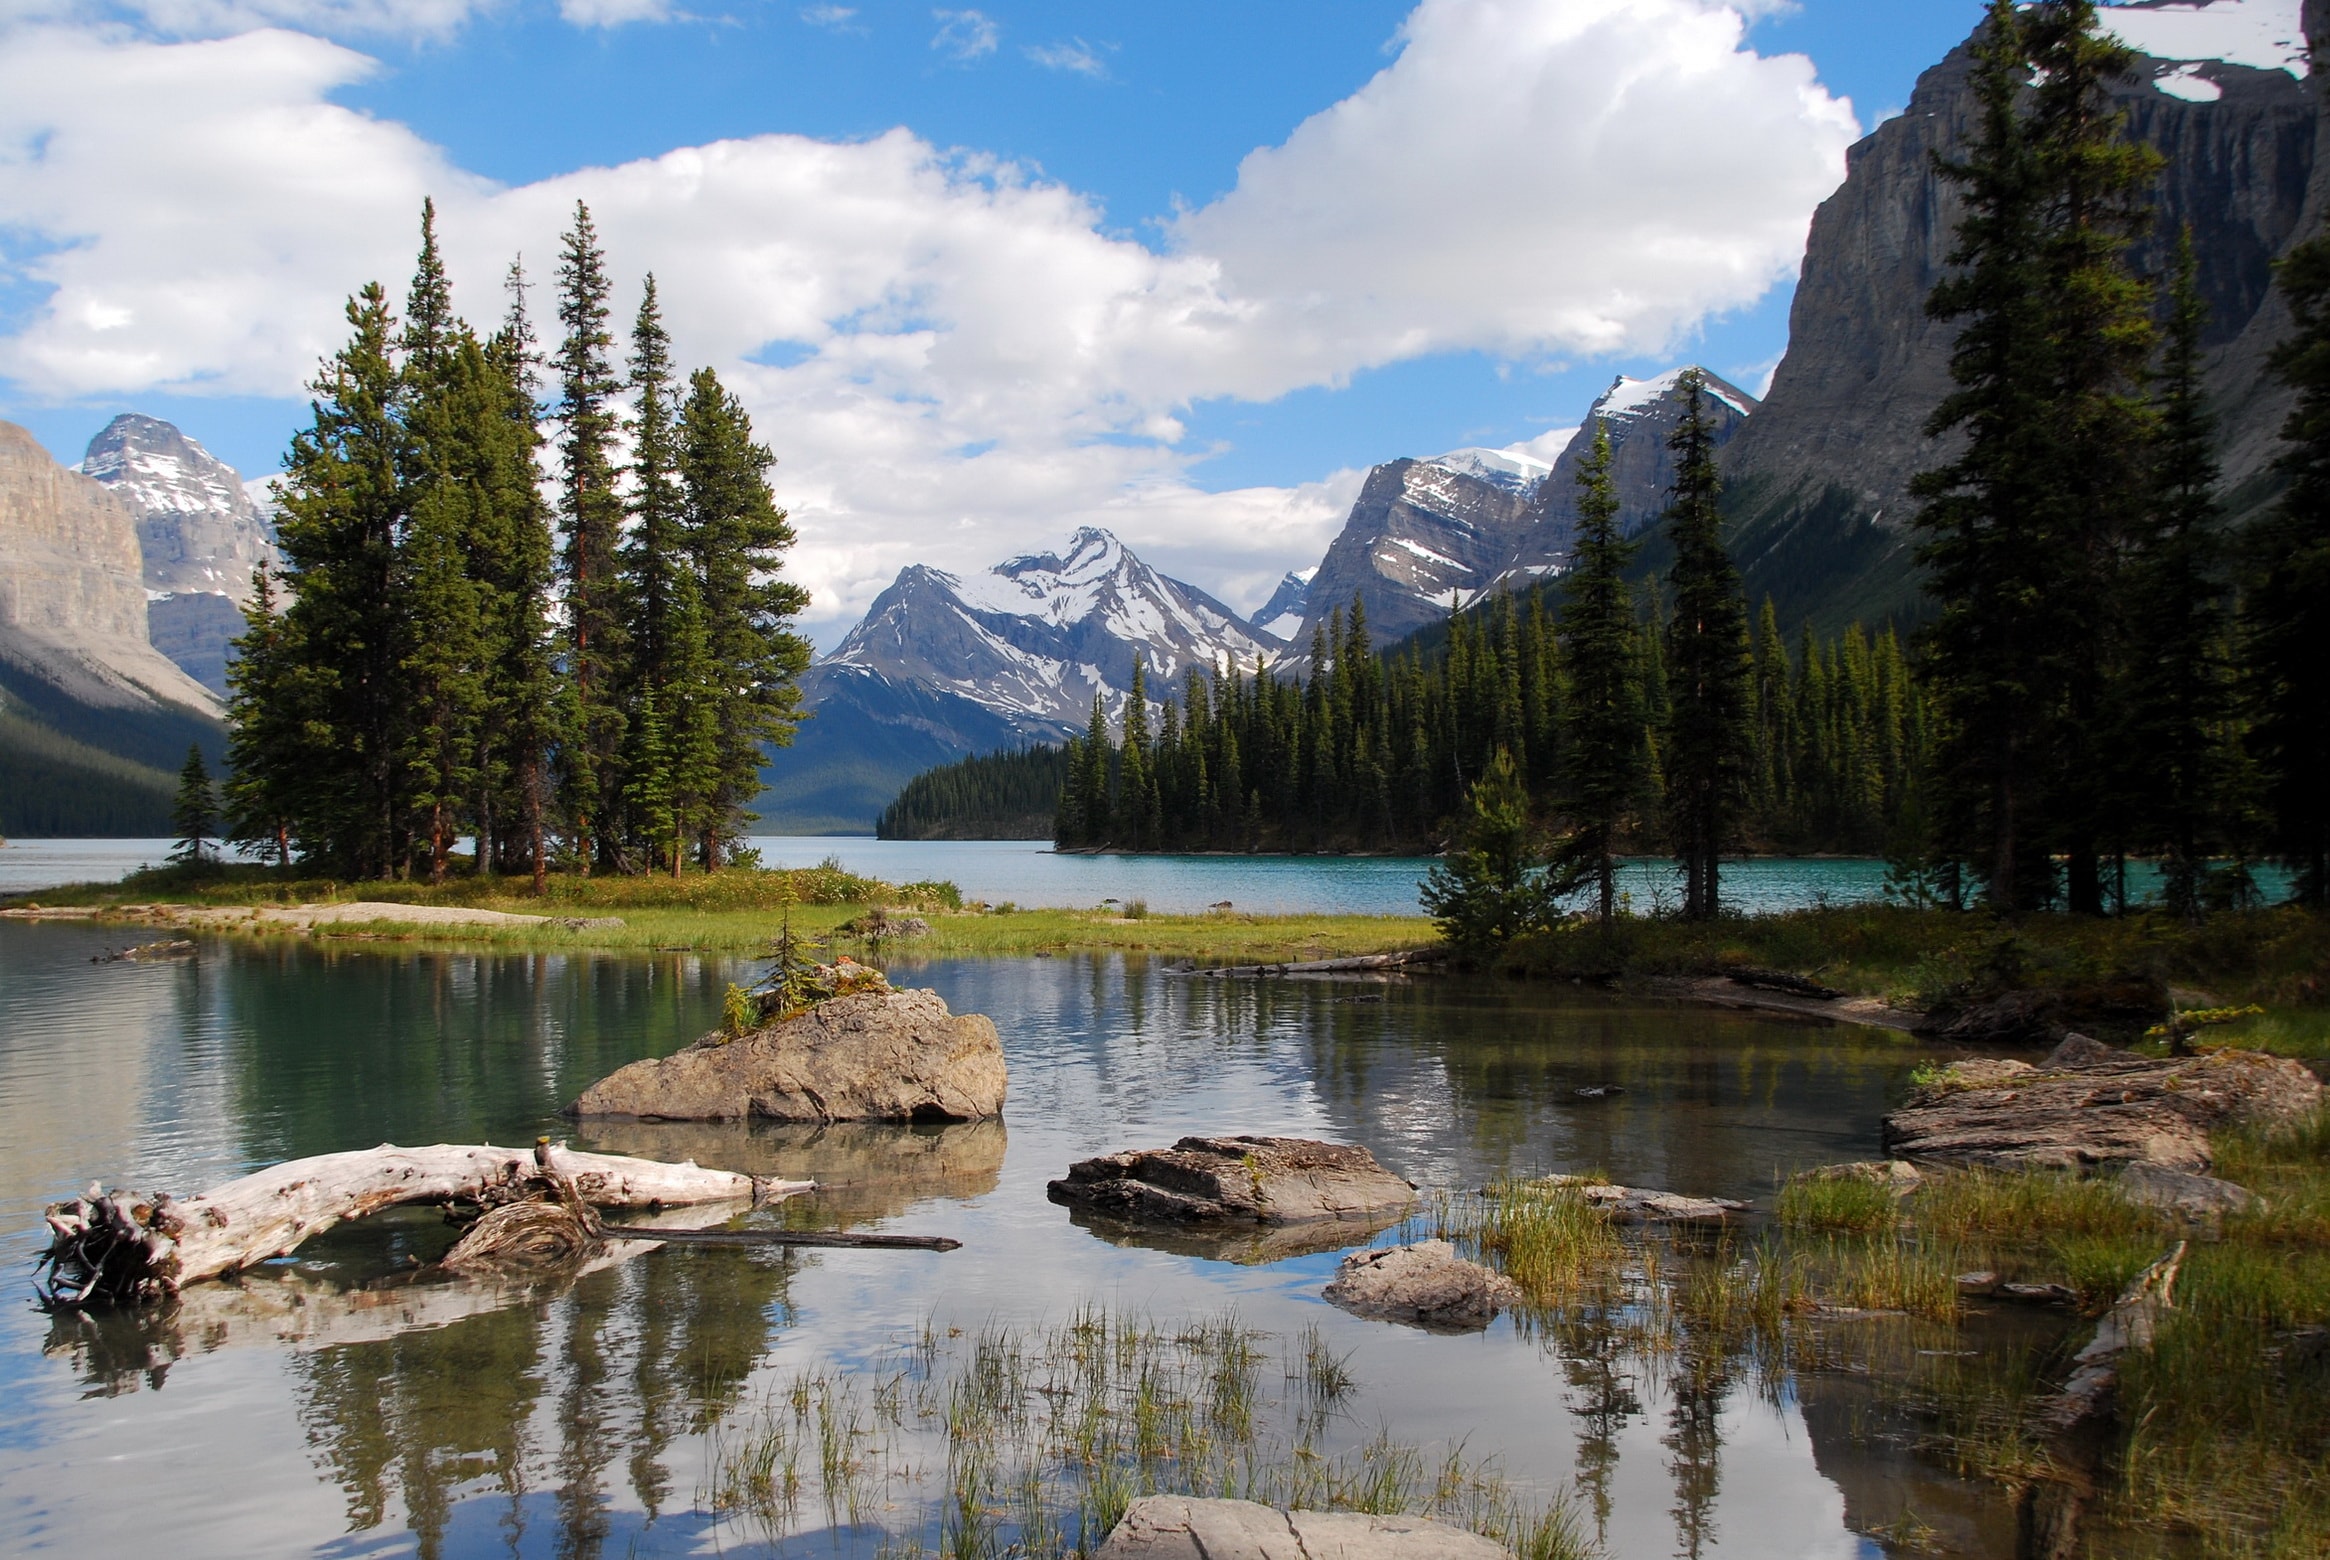 Entry is Free to Canadian National Parks in 2017